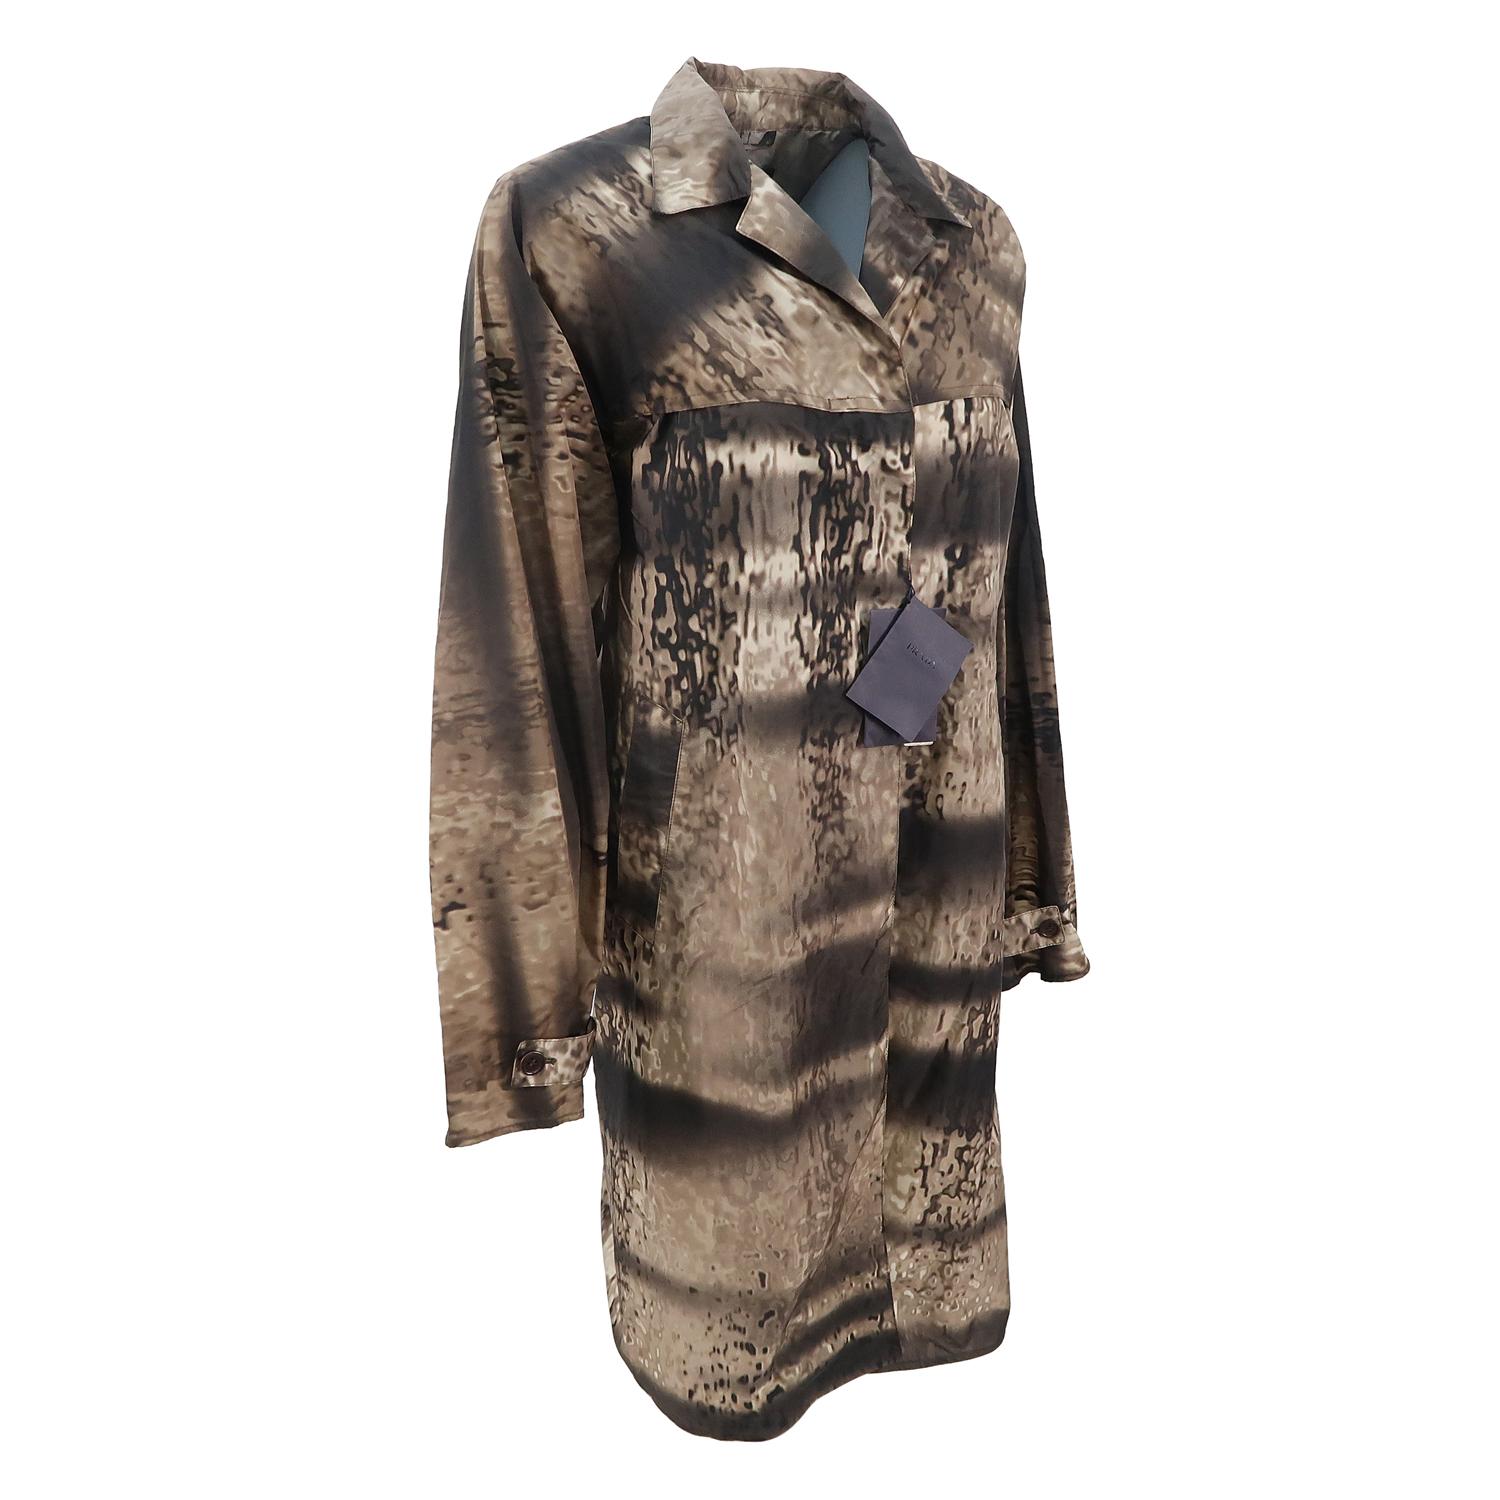 Approaching the cliché idea of army print jackets in exciting and innovative ways is a Prada leitmotif, creating exclusive prints that enhance the most classic shapes. The nylon trench coat is a Prada signature, but the Italian designer adds